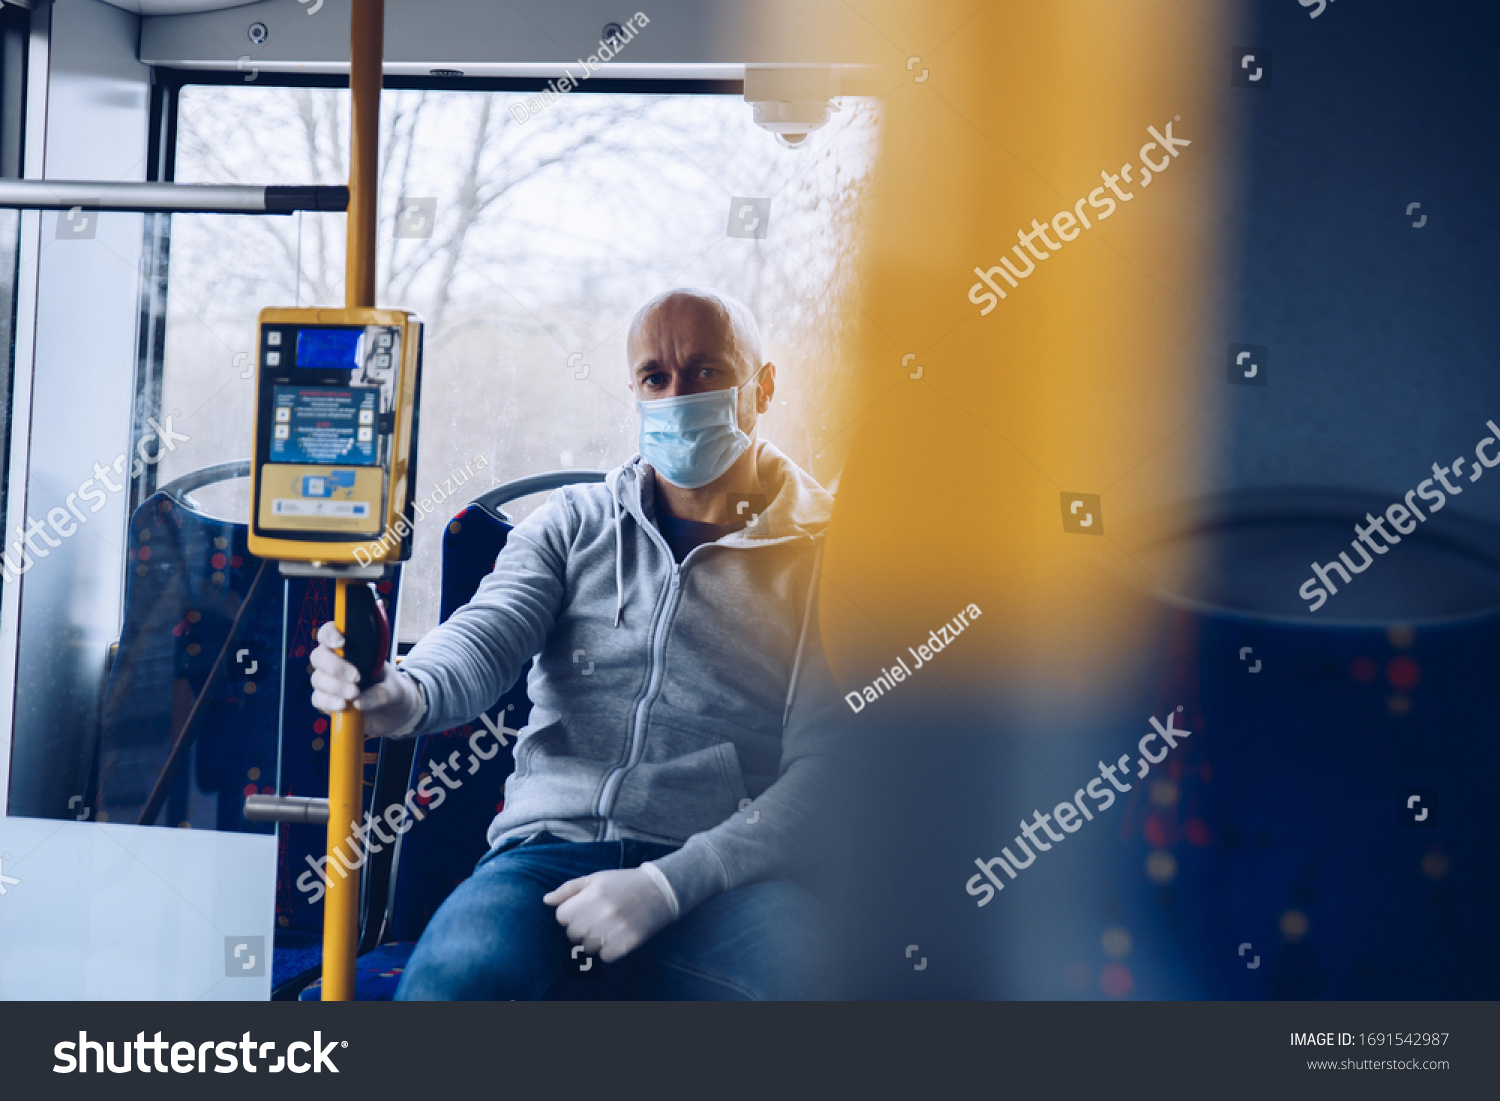 Man in mask and protective gloves traveling by city bus during coronovirus covid-19 pandemic #1691542987